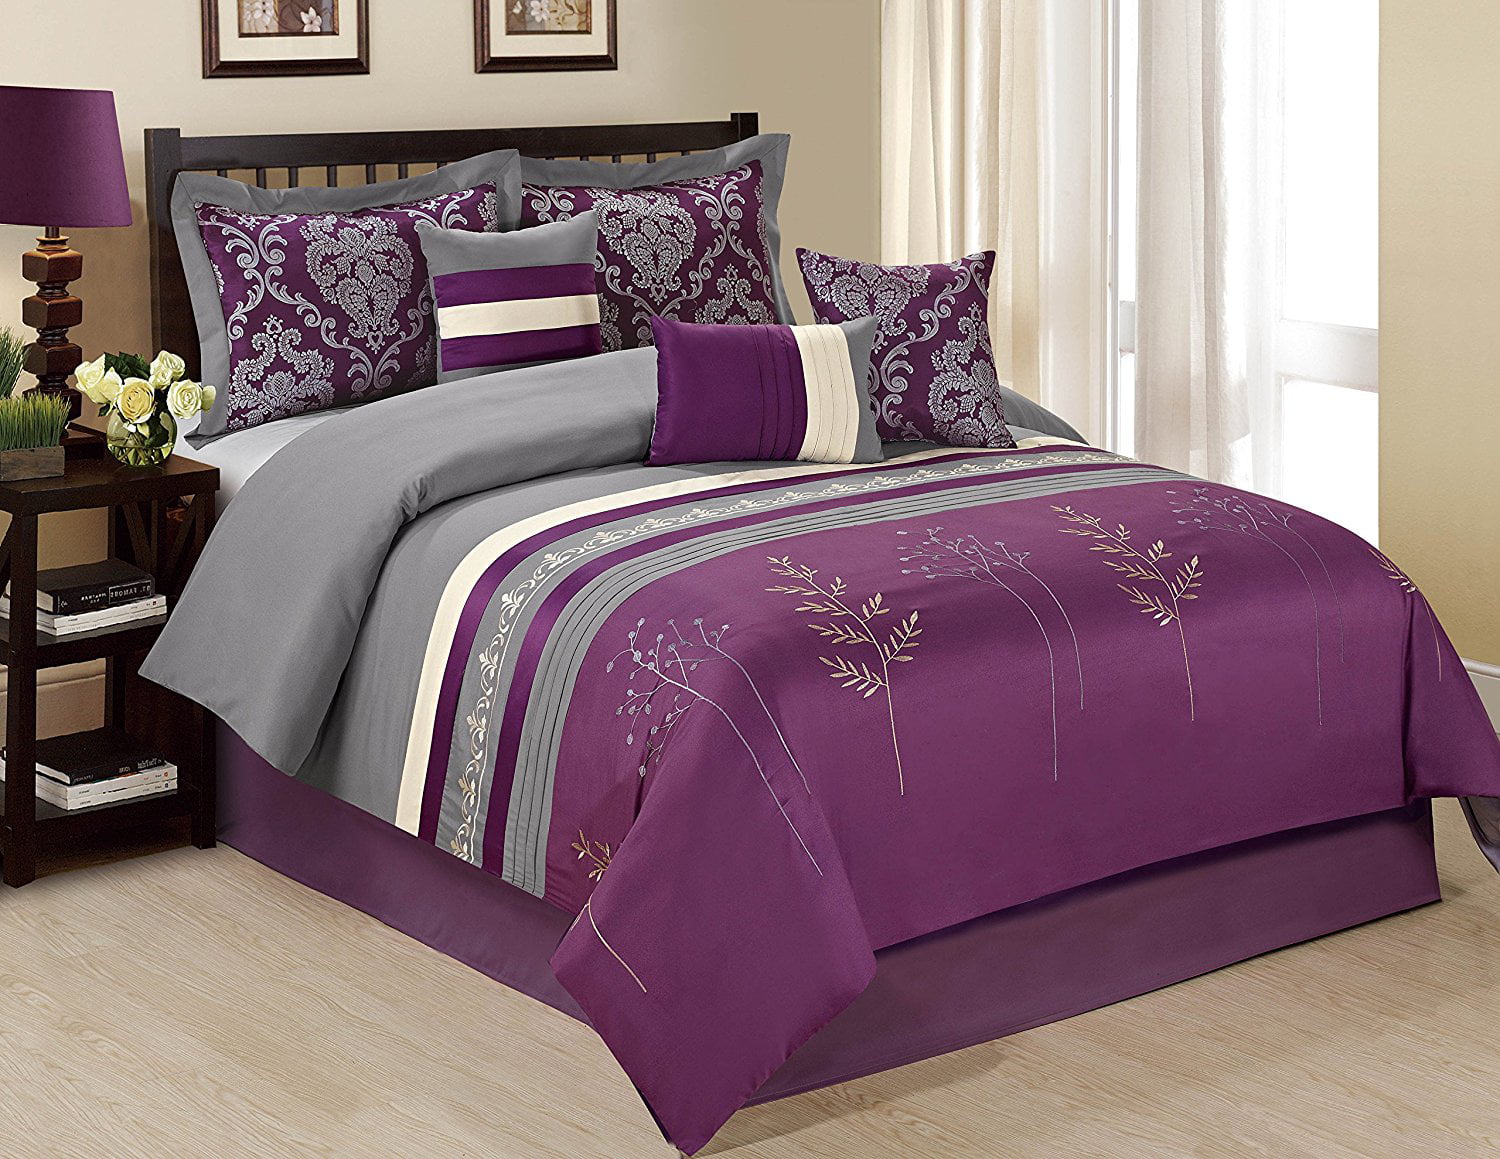 purple and gray comforter sets queen size